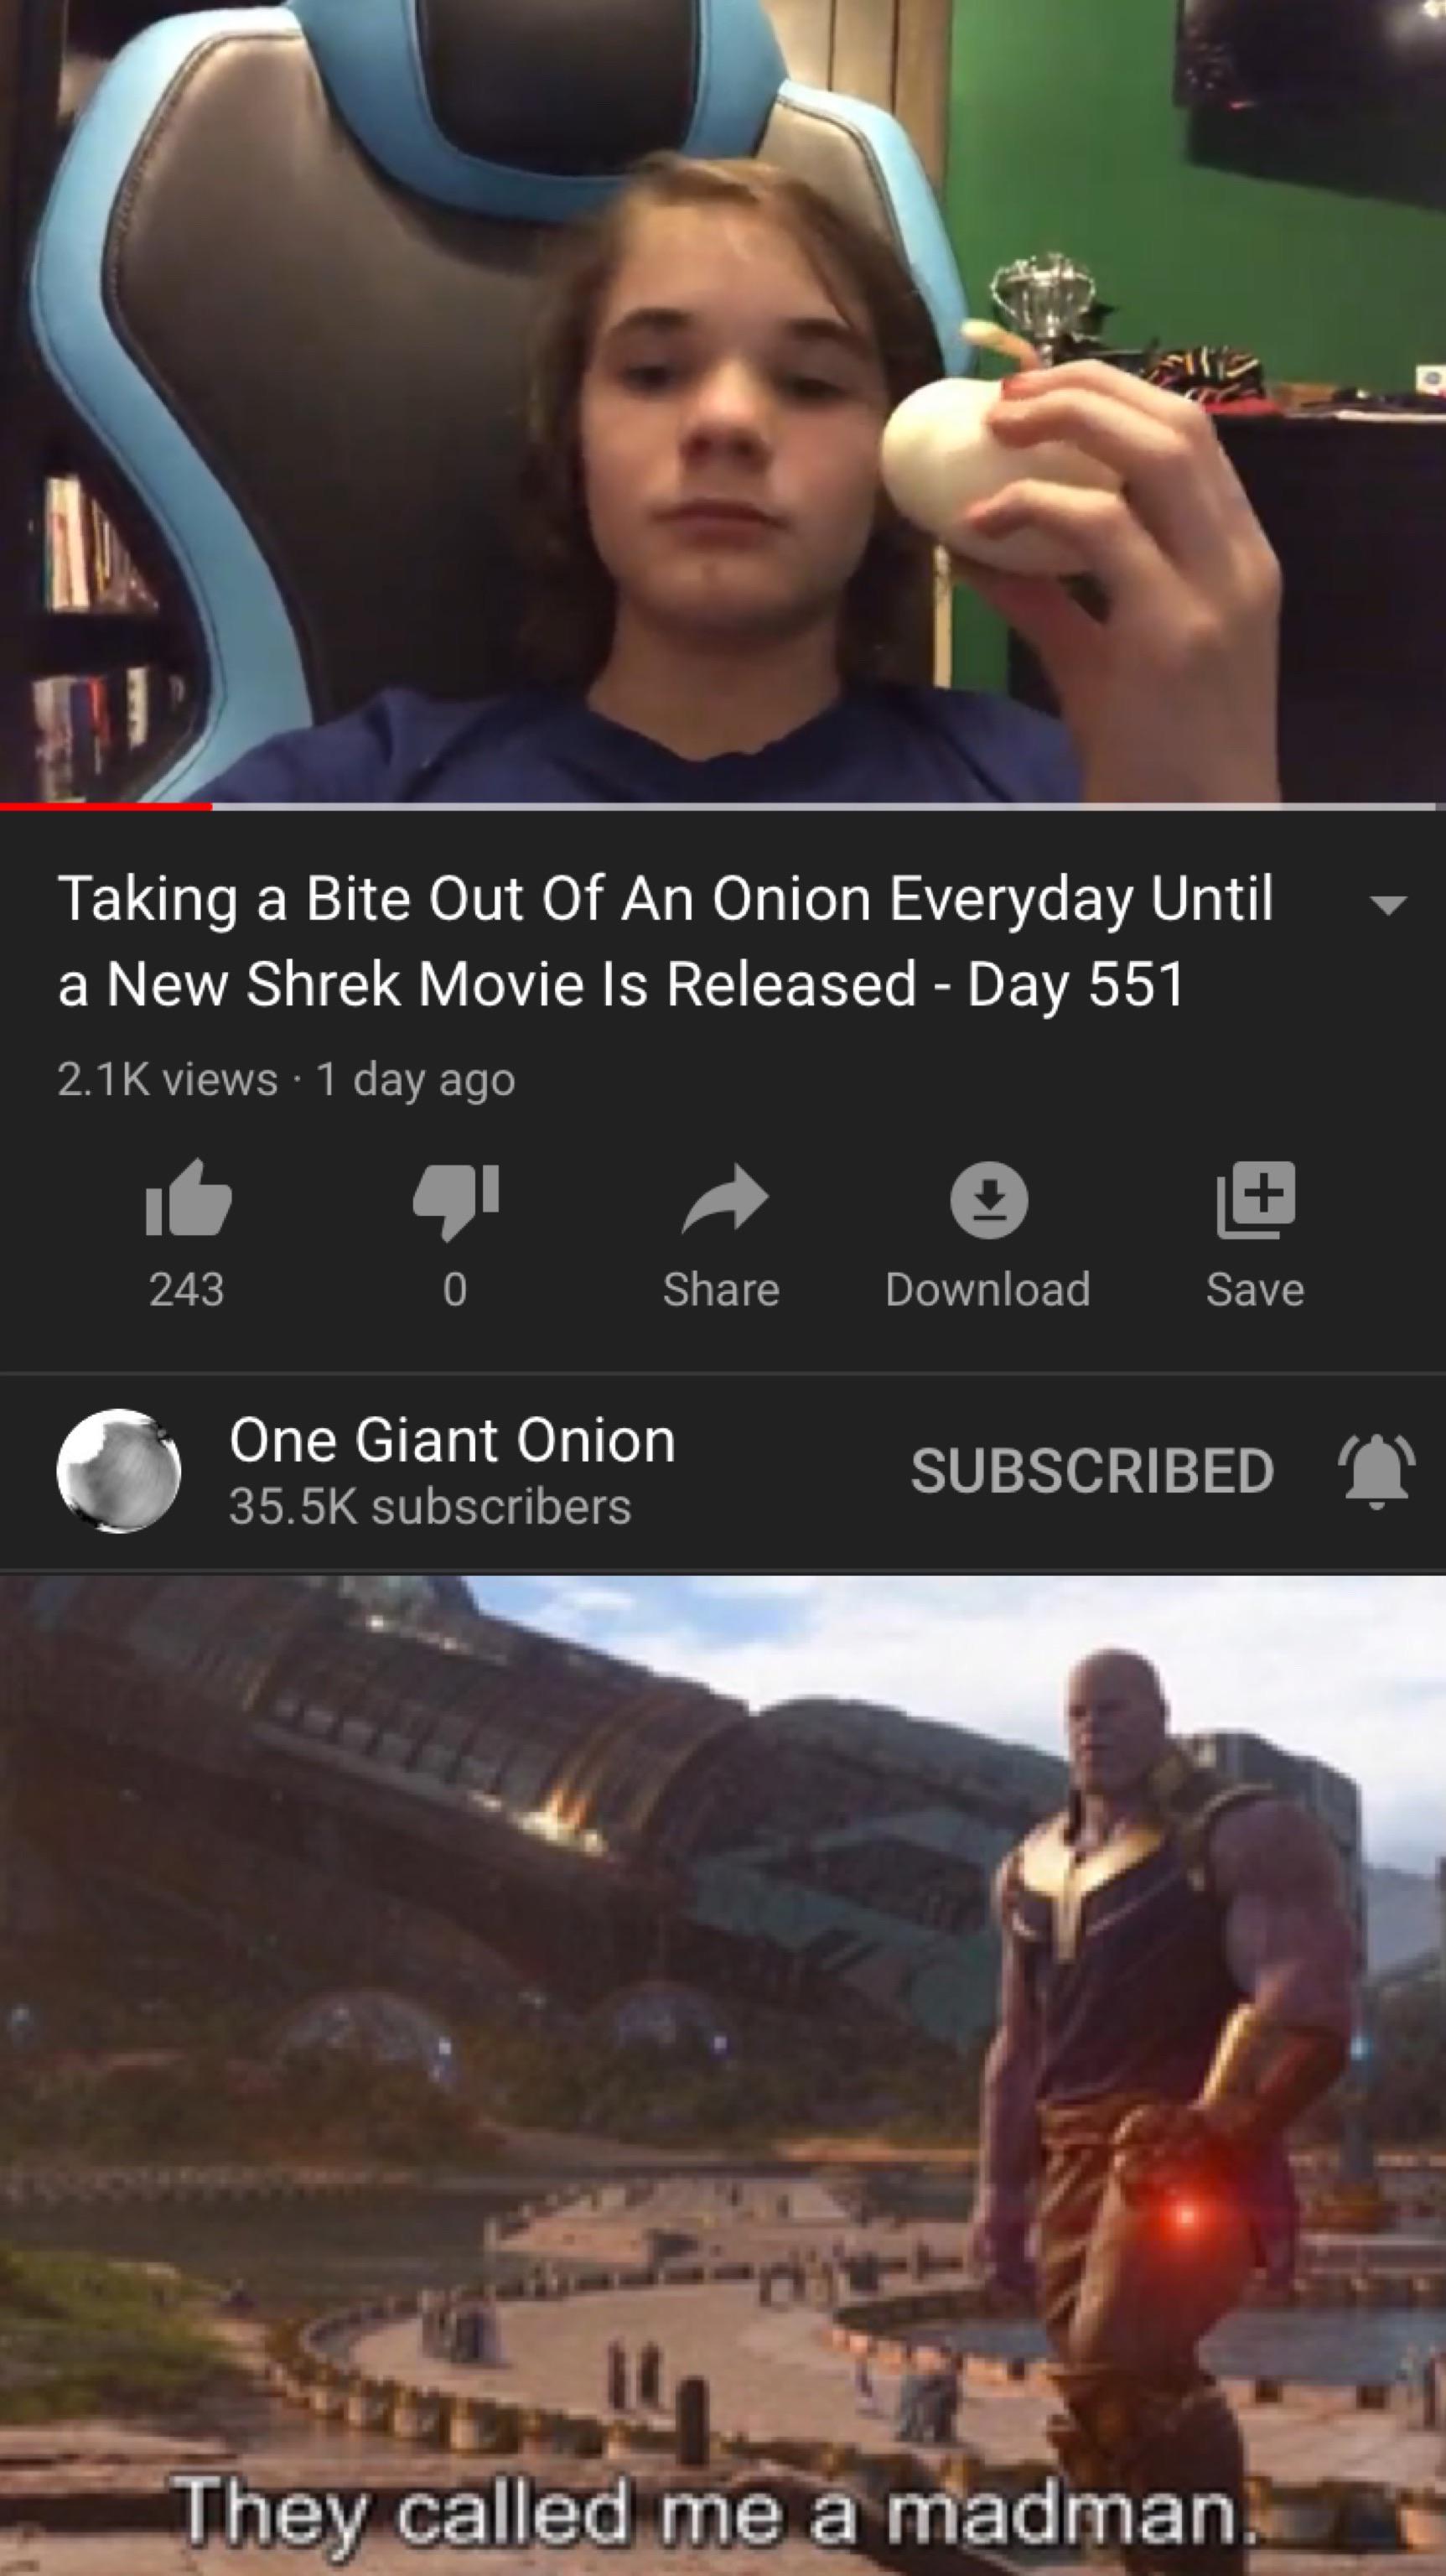 reddit dank memes 2020 - man eats banana taped to wall - Taking a Bite Out Of An Onion Everyday Until a New Shrek Movie Is Released Day 551 views 1 day ago 243 0 Download Save One Giant Onion subscribers Subscribed They called me a madman.